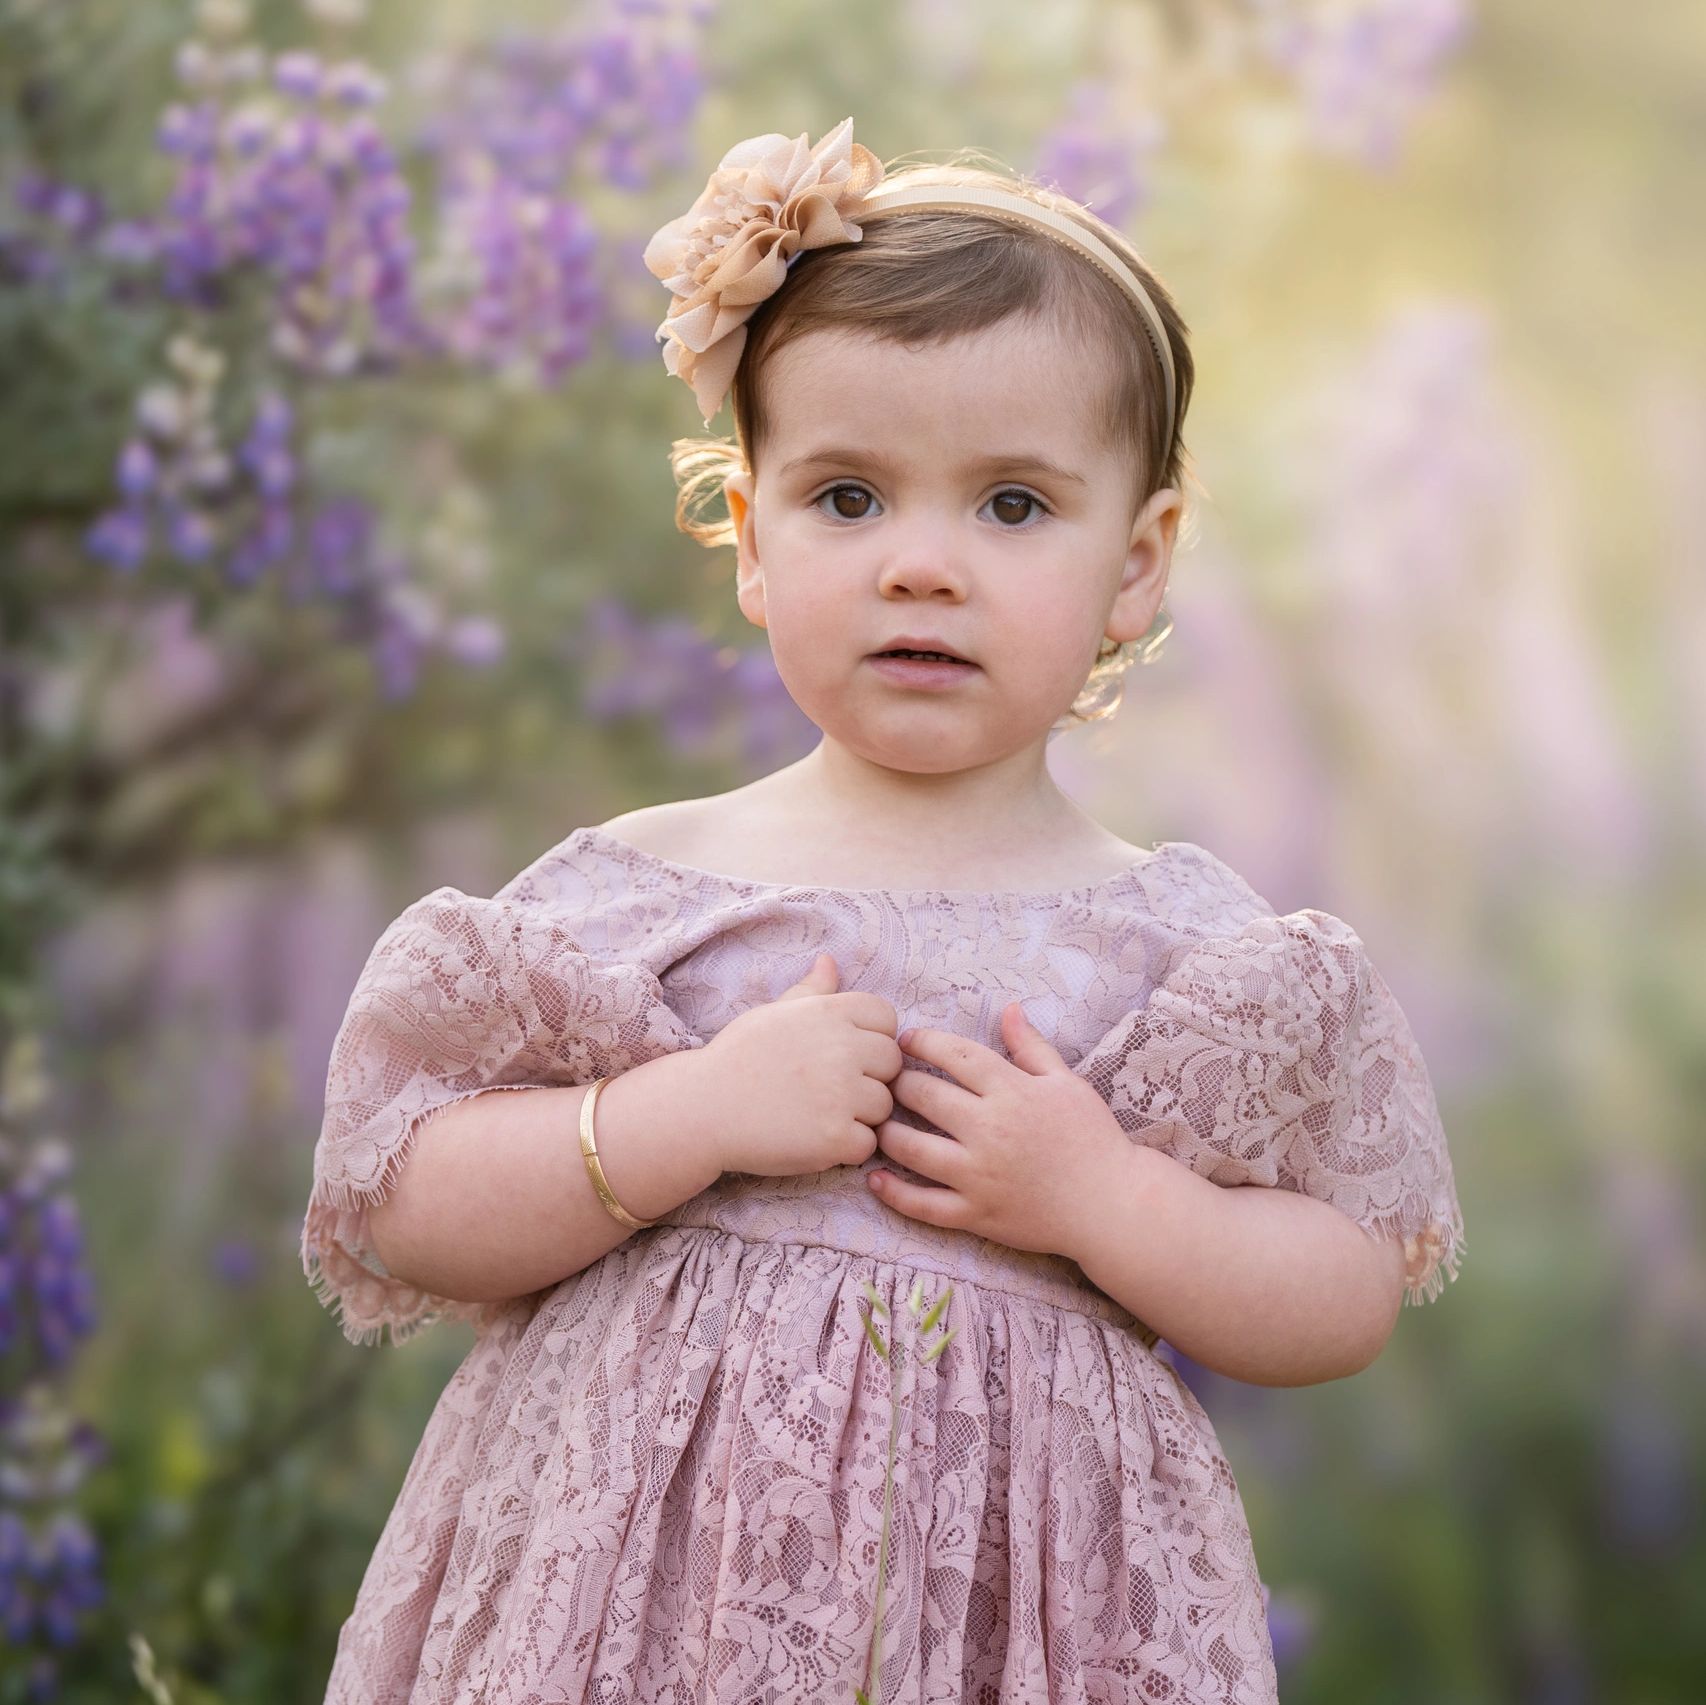 Toddler girl in lace dress standing in a field of lupine flowers